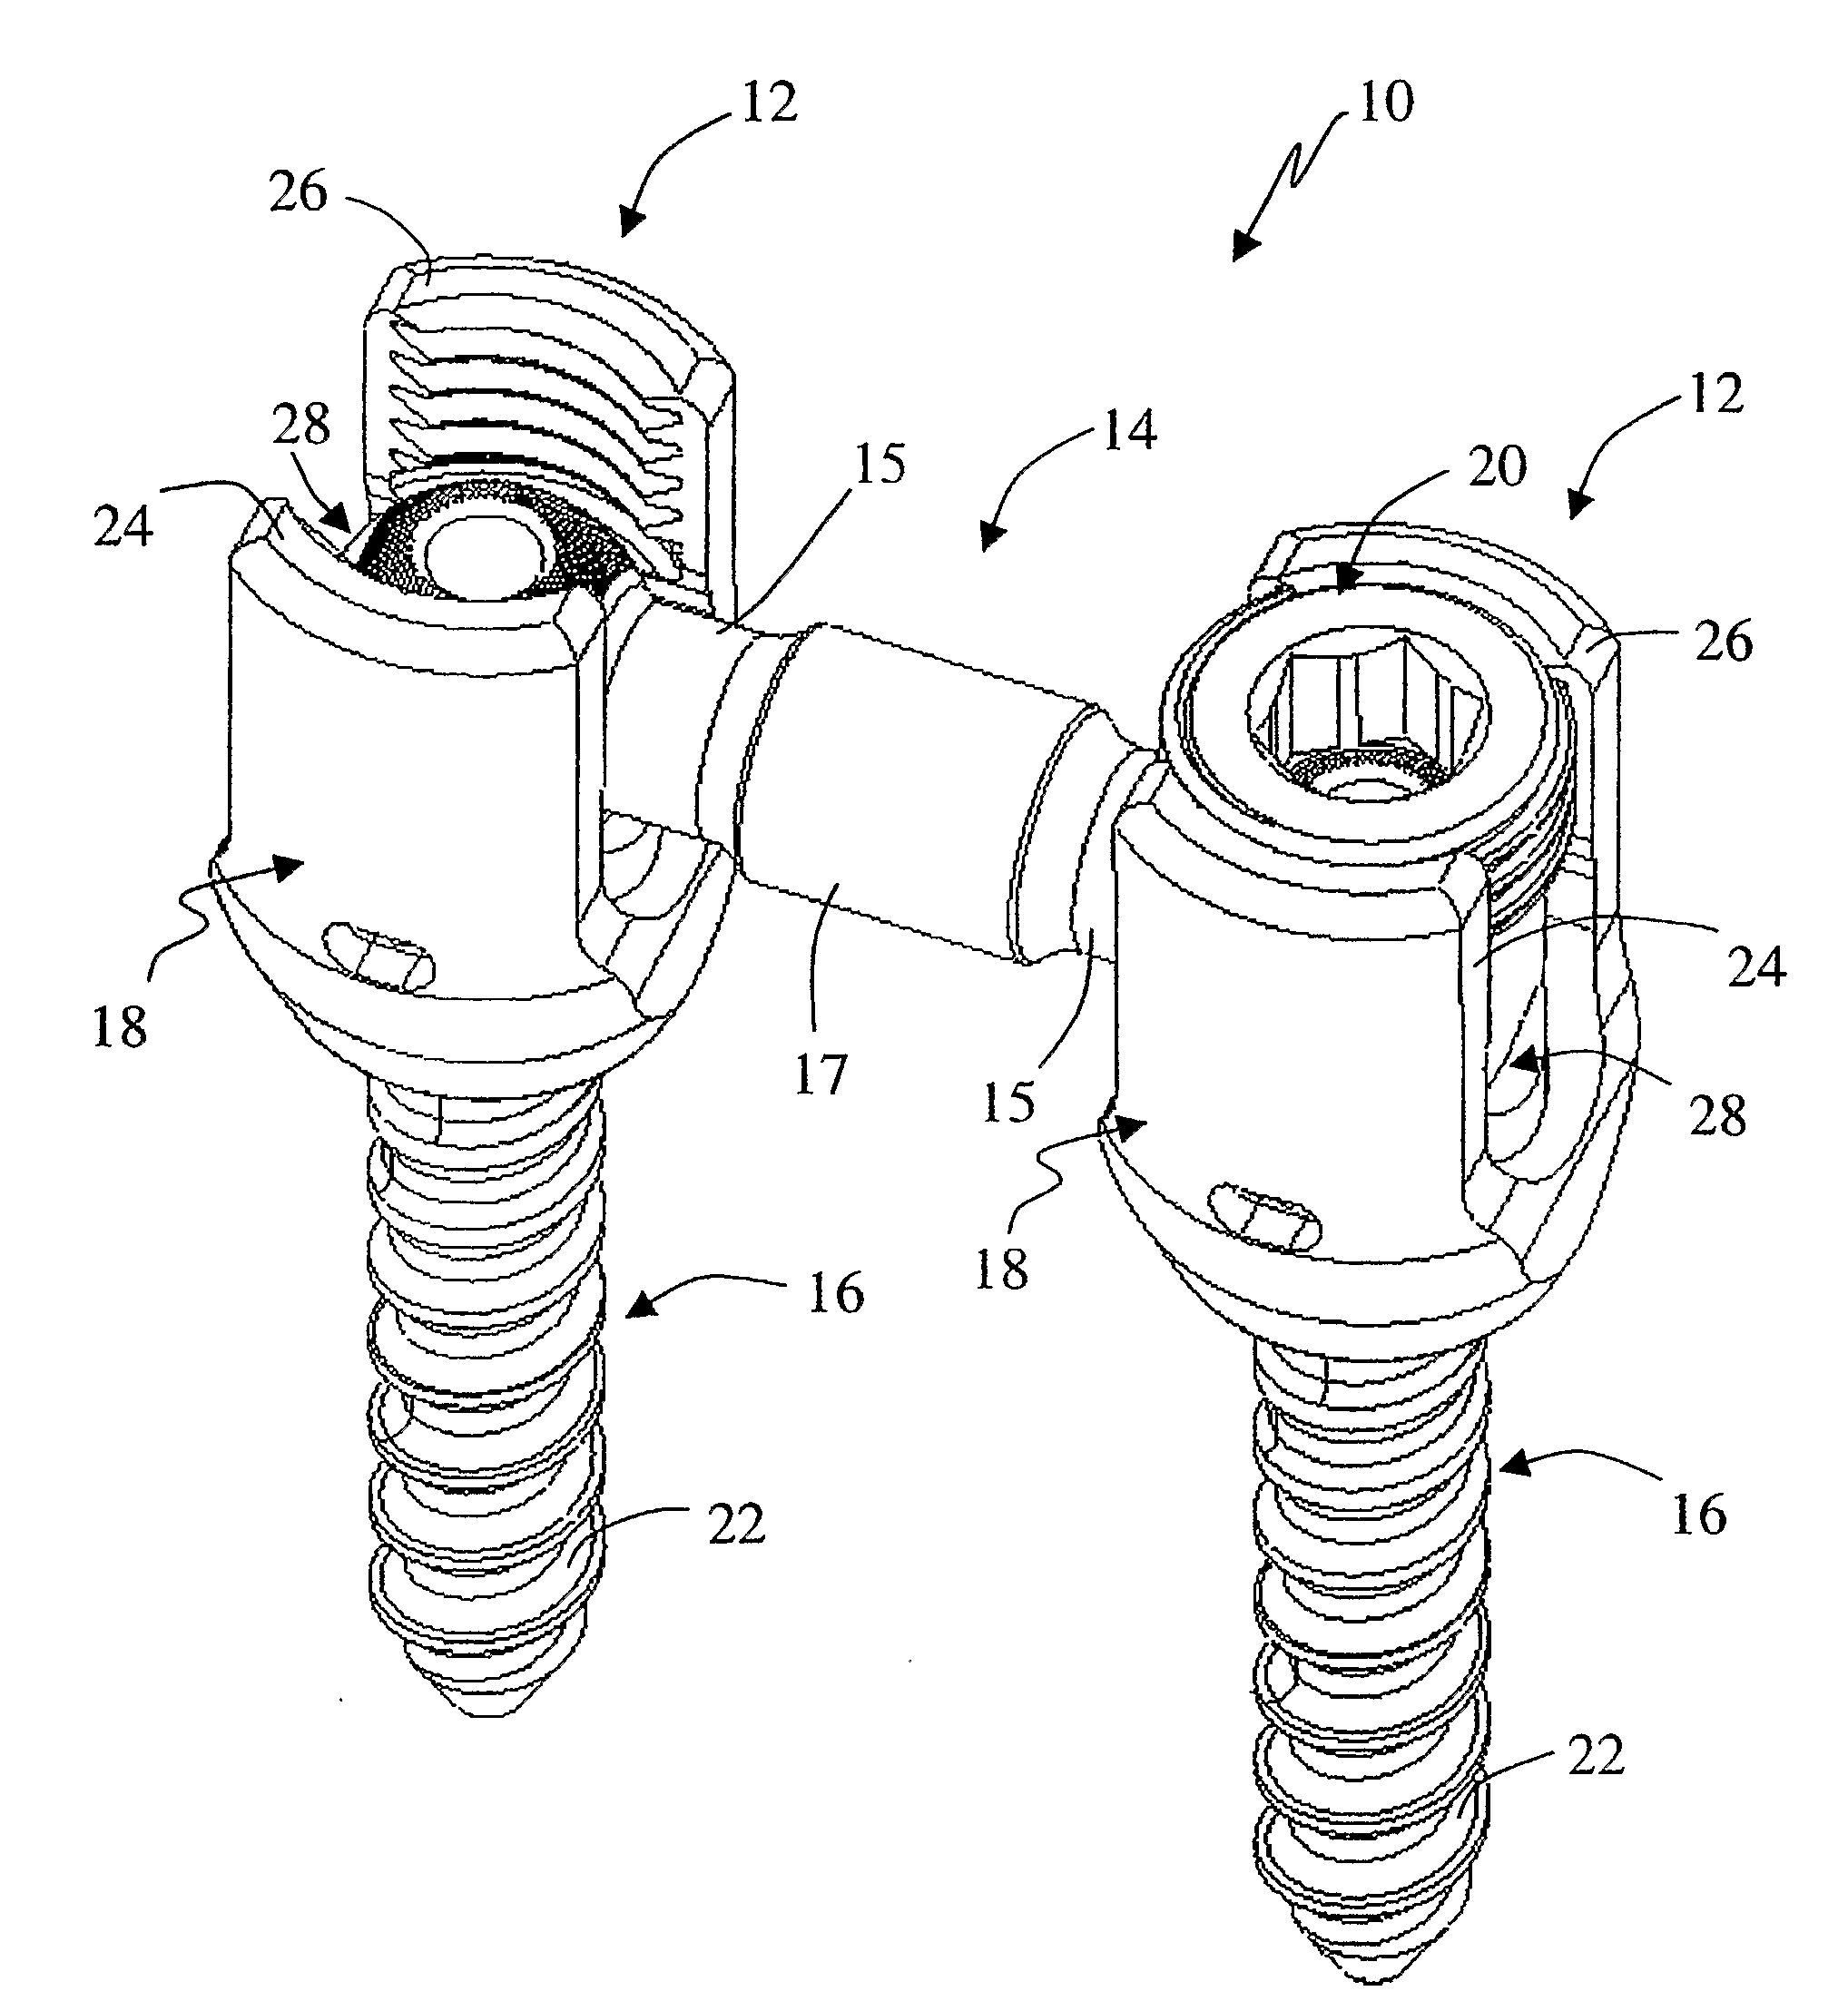 System and Methods For Performing Spinal Fixation